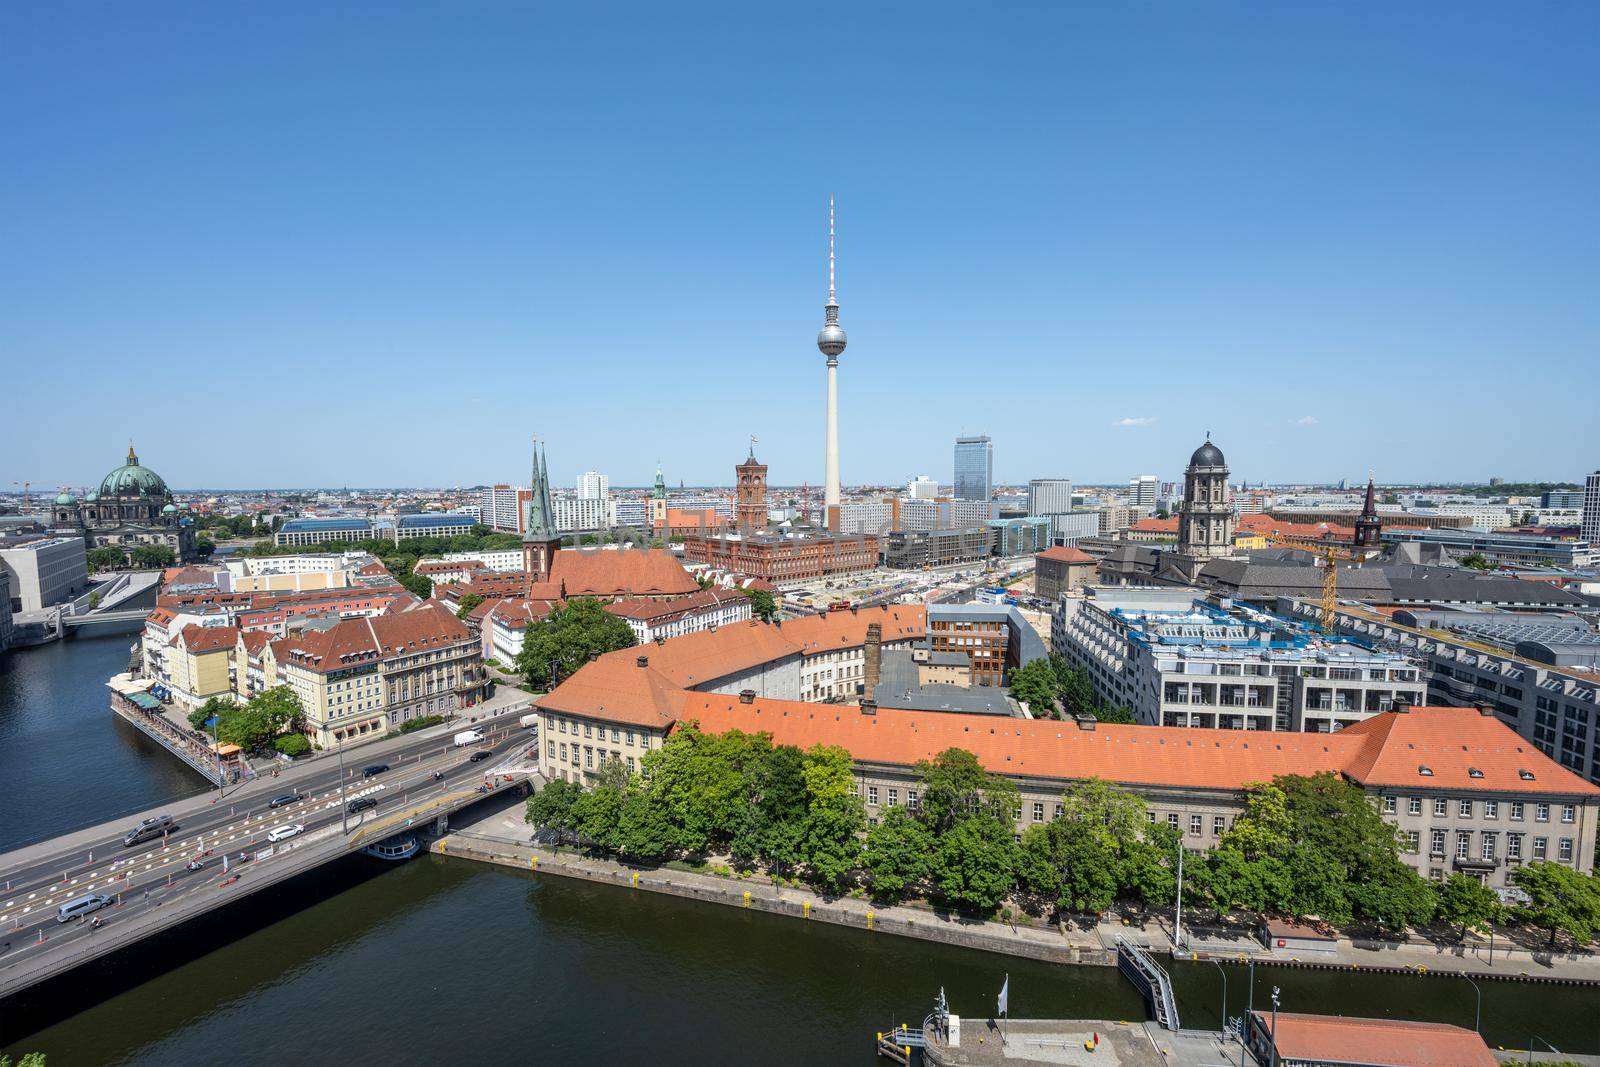 The center of Berlin with the famous TV Tower by elxeneize